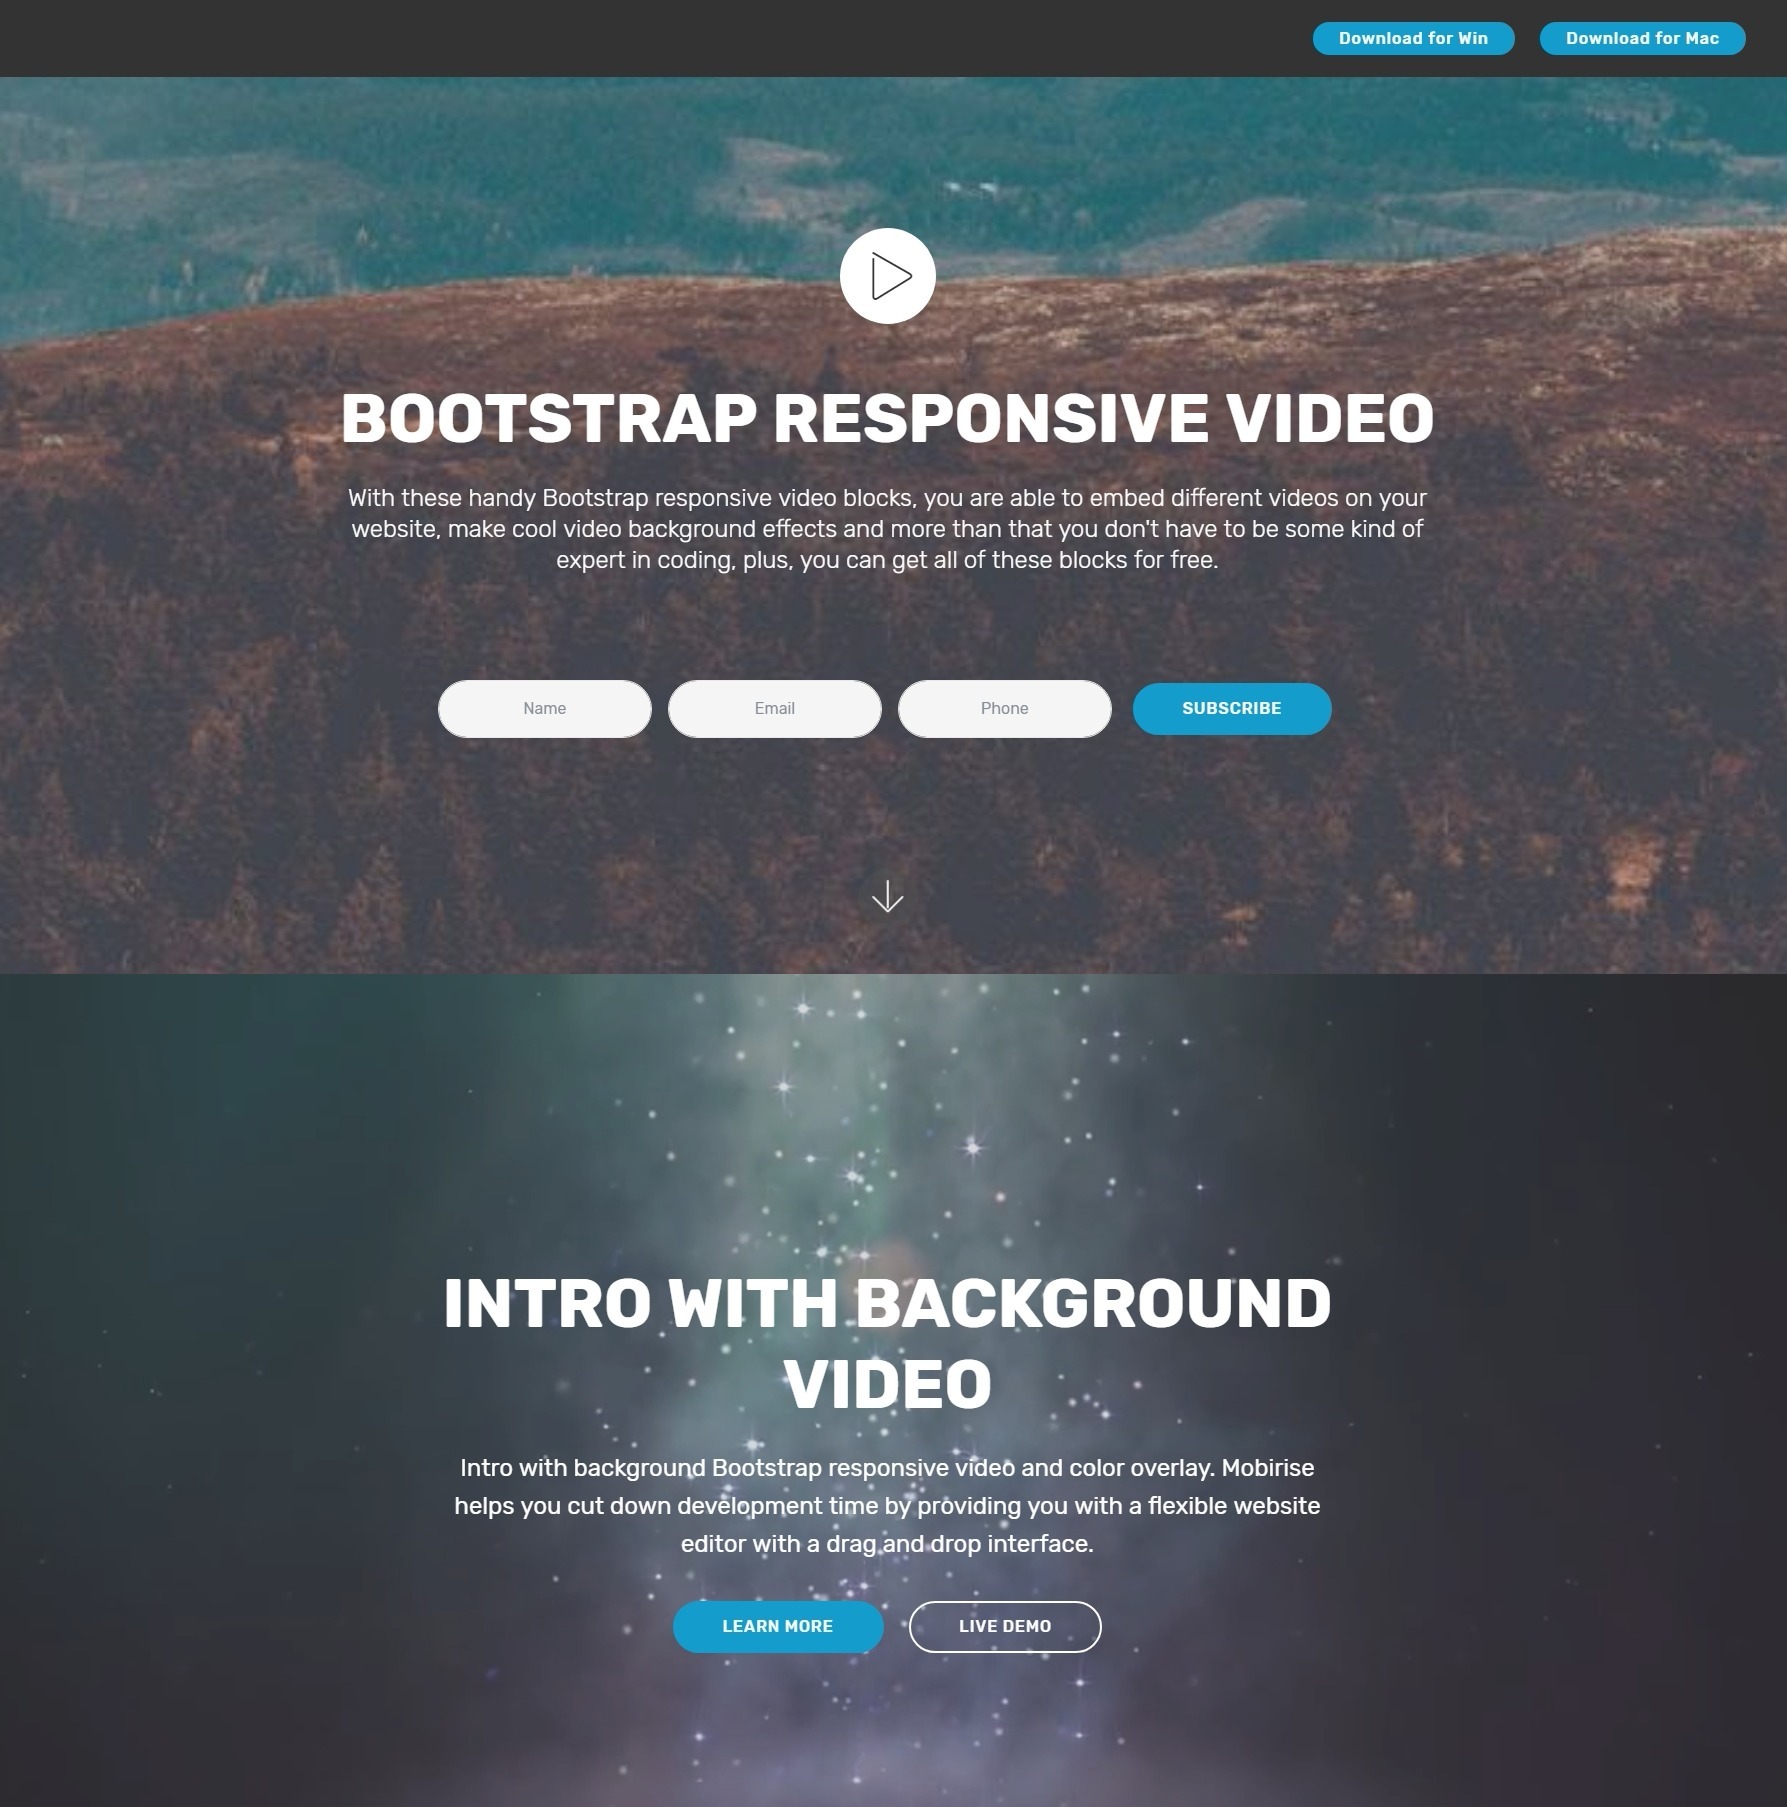 New and Beautiful HTML5 Bootstrap Carousel Video Players and Hamburger